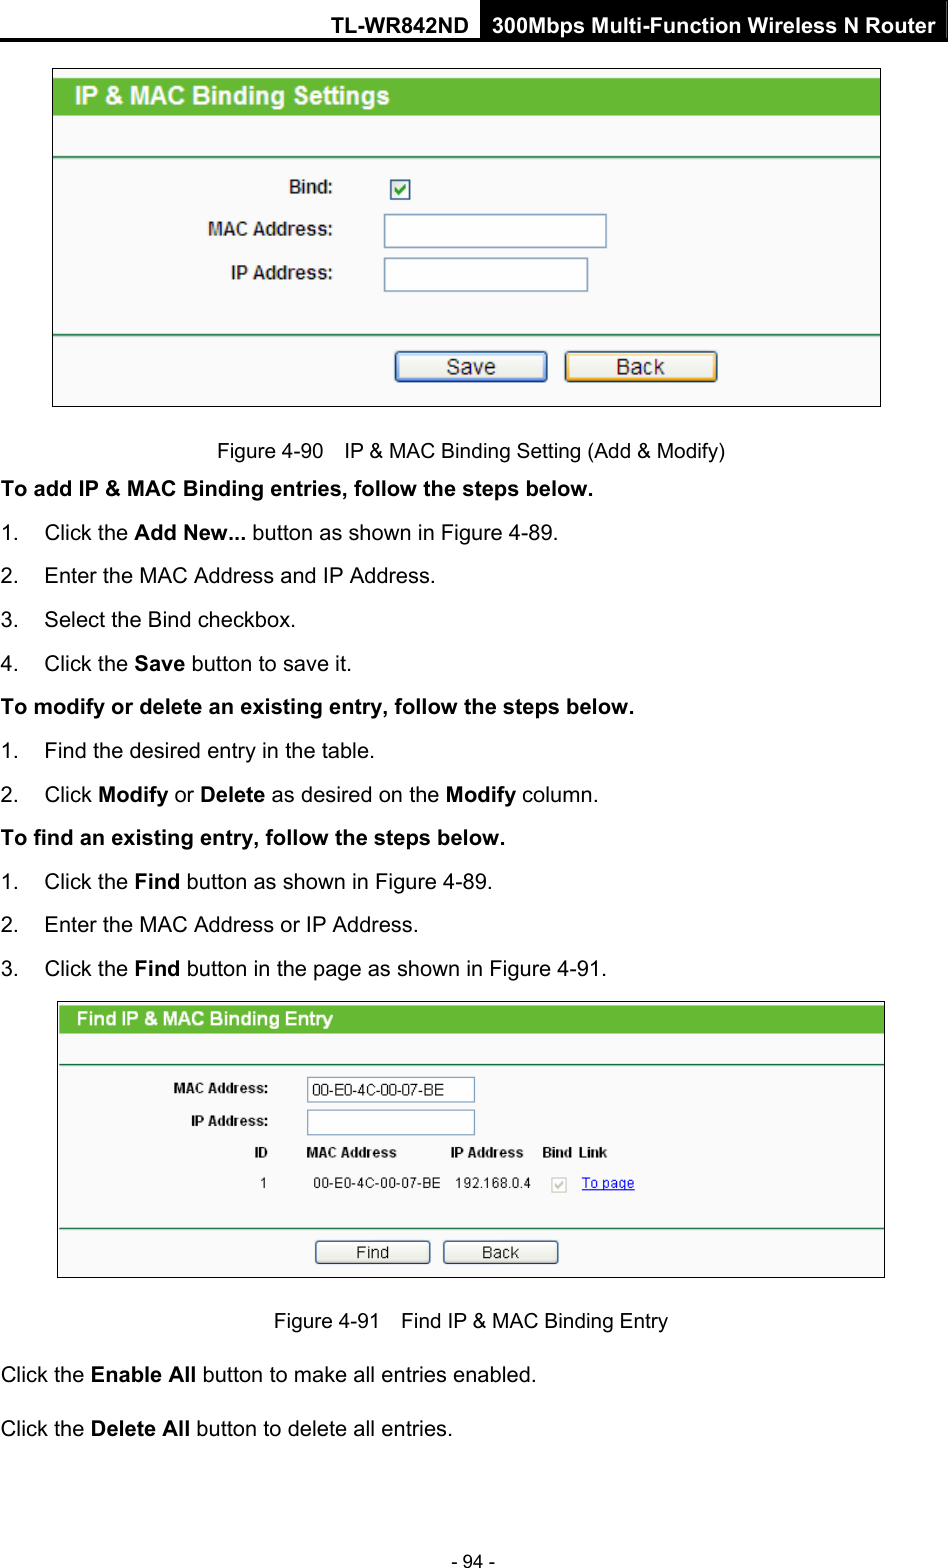 TL-WR842ND 300Mbps Multi-Function Wireless N Router - 94 -  Figure 4-90    IP &amp; MAC Binding Setting (Add &amp; Modify) To add IP &amp; MAC Binding entries, follow the steps below. 1. Click the Add New... button as shown in Figure 4-89.  2.  Enter the MAC Address and IP Address. 3.  Select the Bind checkbox.   4. Click the Save button to save it. To modify or delete an existing entry, follow the steps below. 1.  Find the desired entry in the table.   2. Click Modify or Delete as desired on the Modify column.   To find an existing entry, follow the steps below. 1. Click the Find button as shown in Figure 4-89. 2.  Enter the MAC Address or IP Address. 3. Click the Find button in the page as shown in Figure 4-91.  Figure 4-91    Find IP &amp; MAC Binding Entry Click the Enable All button to make all entries enabled. Click the Delete All button to delete all entries. 